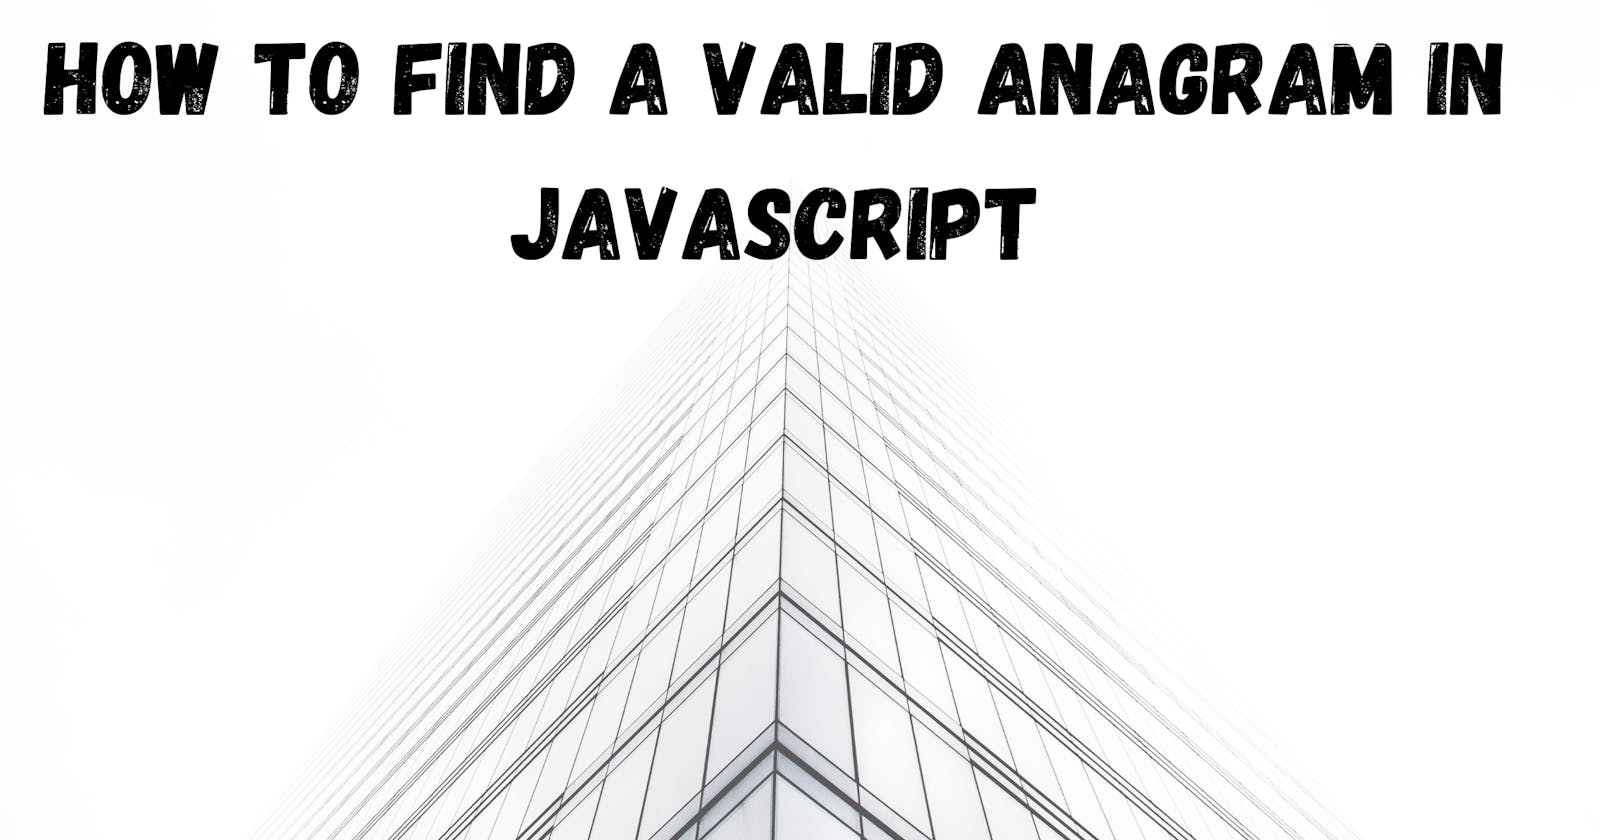 How to find a valid anagram in Javascript?